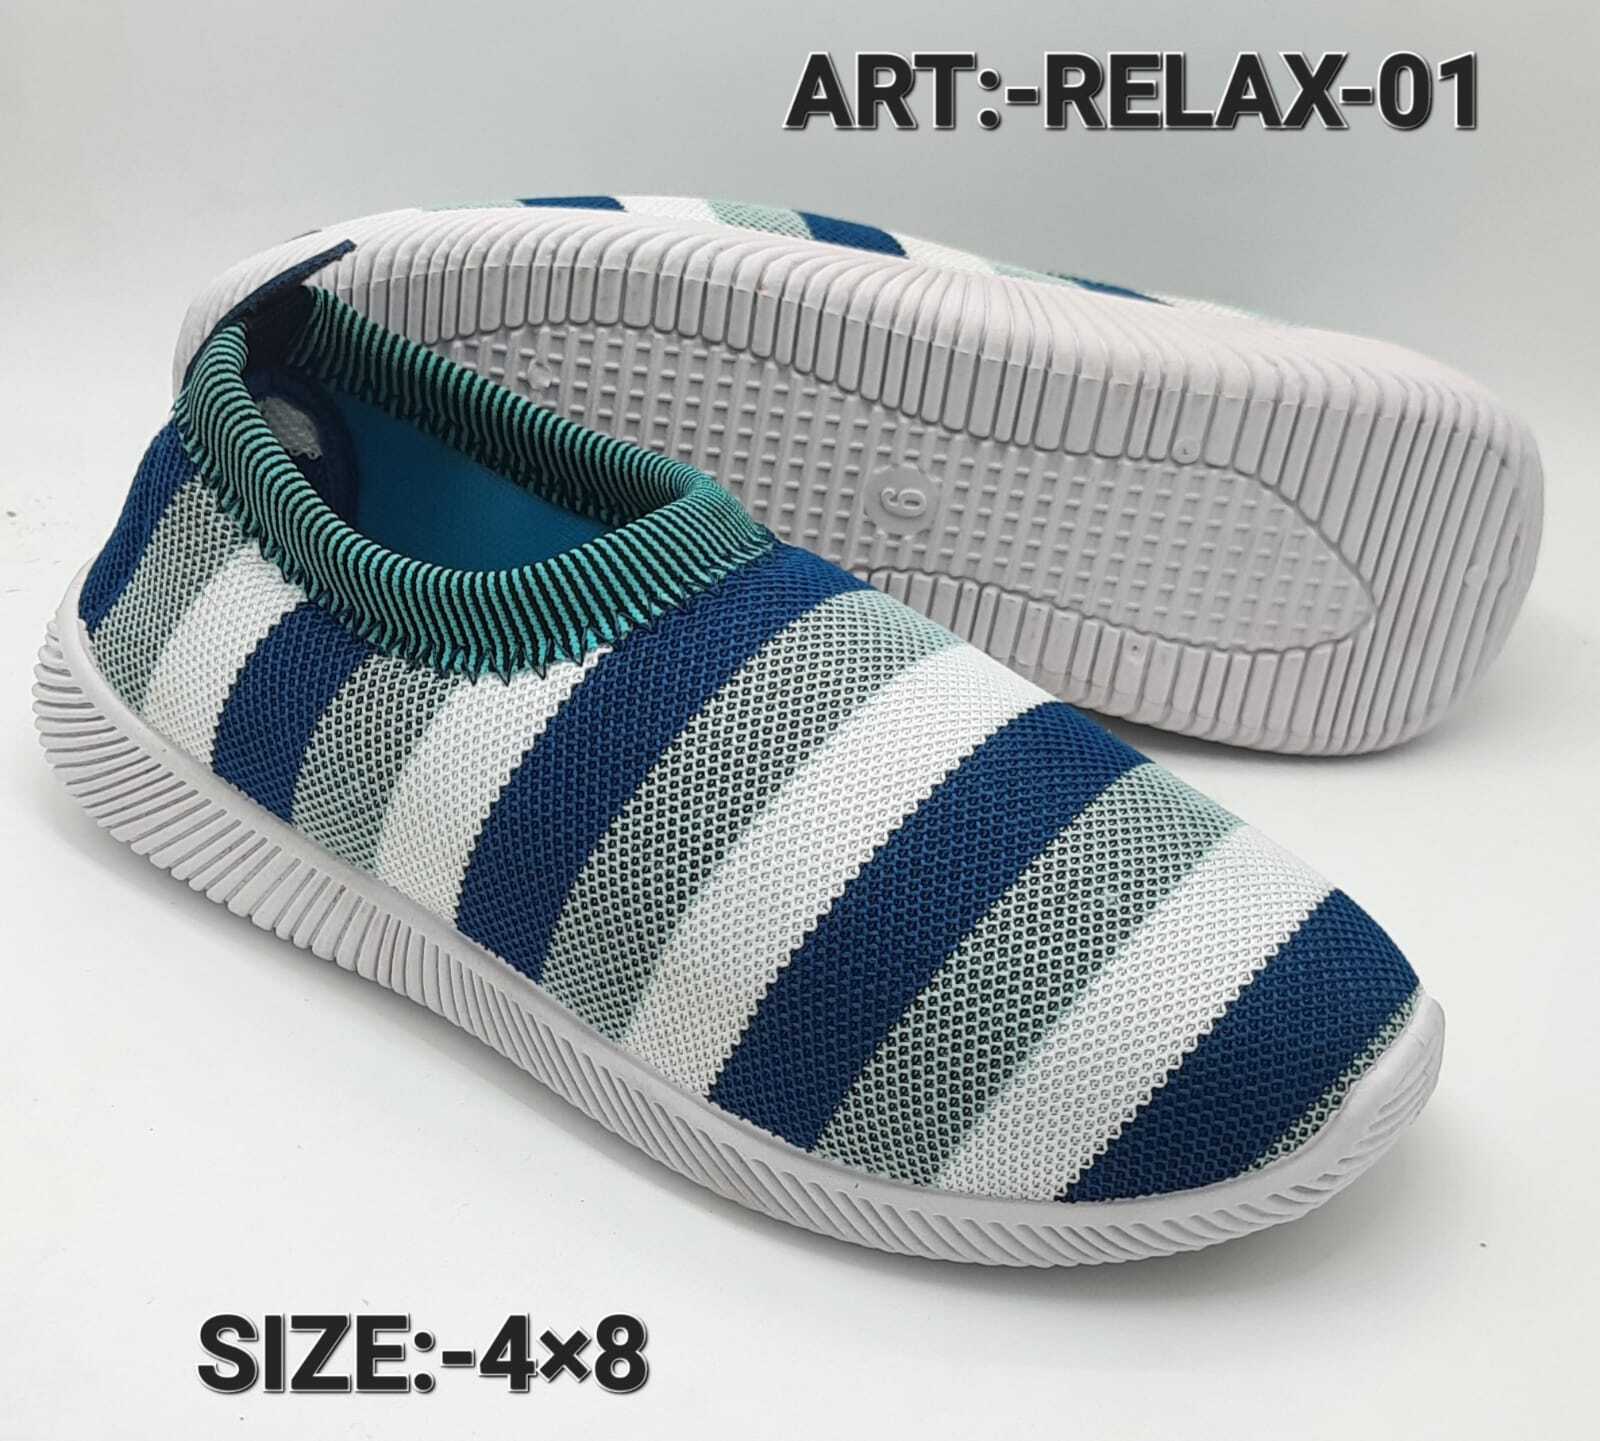 relax ladies shoes